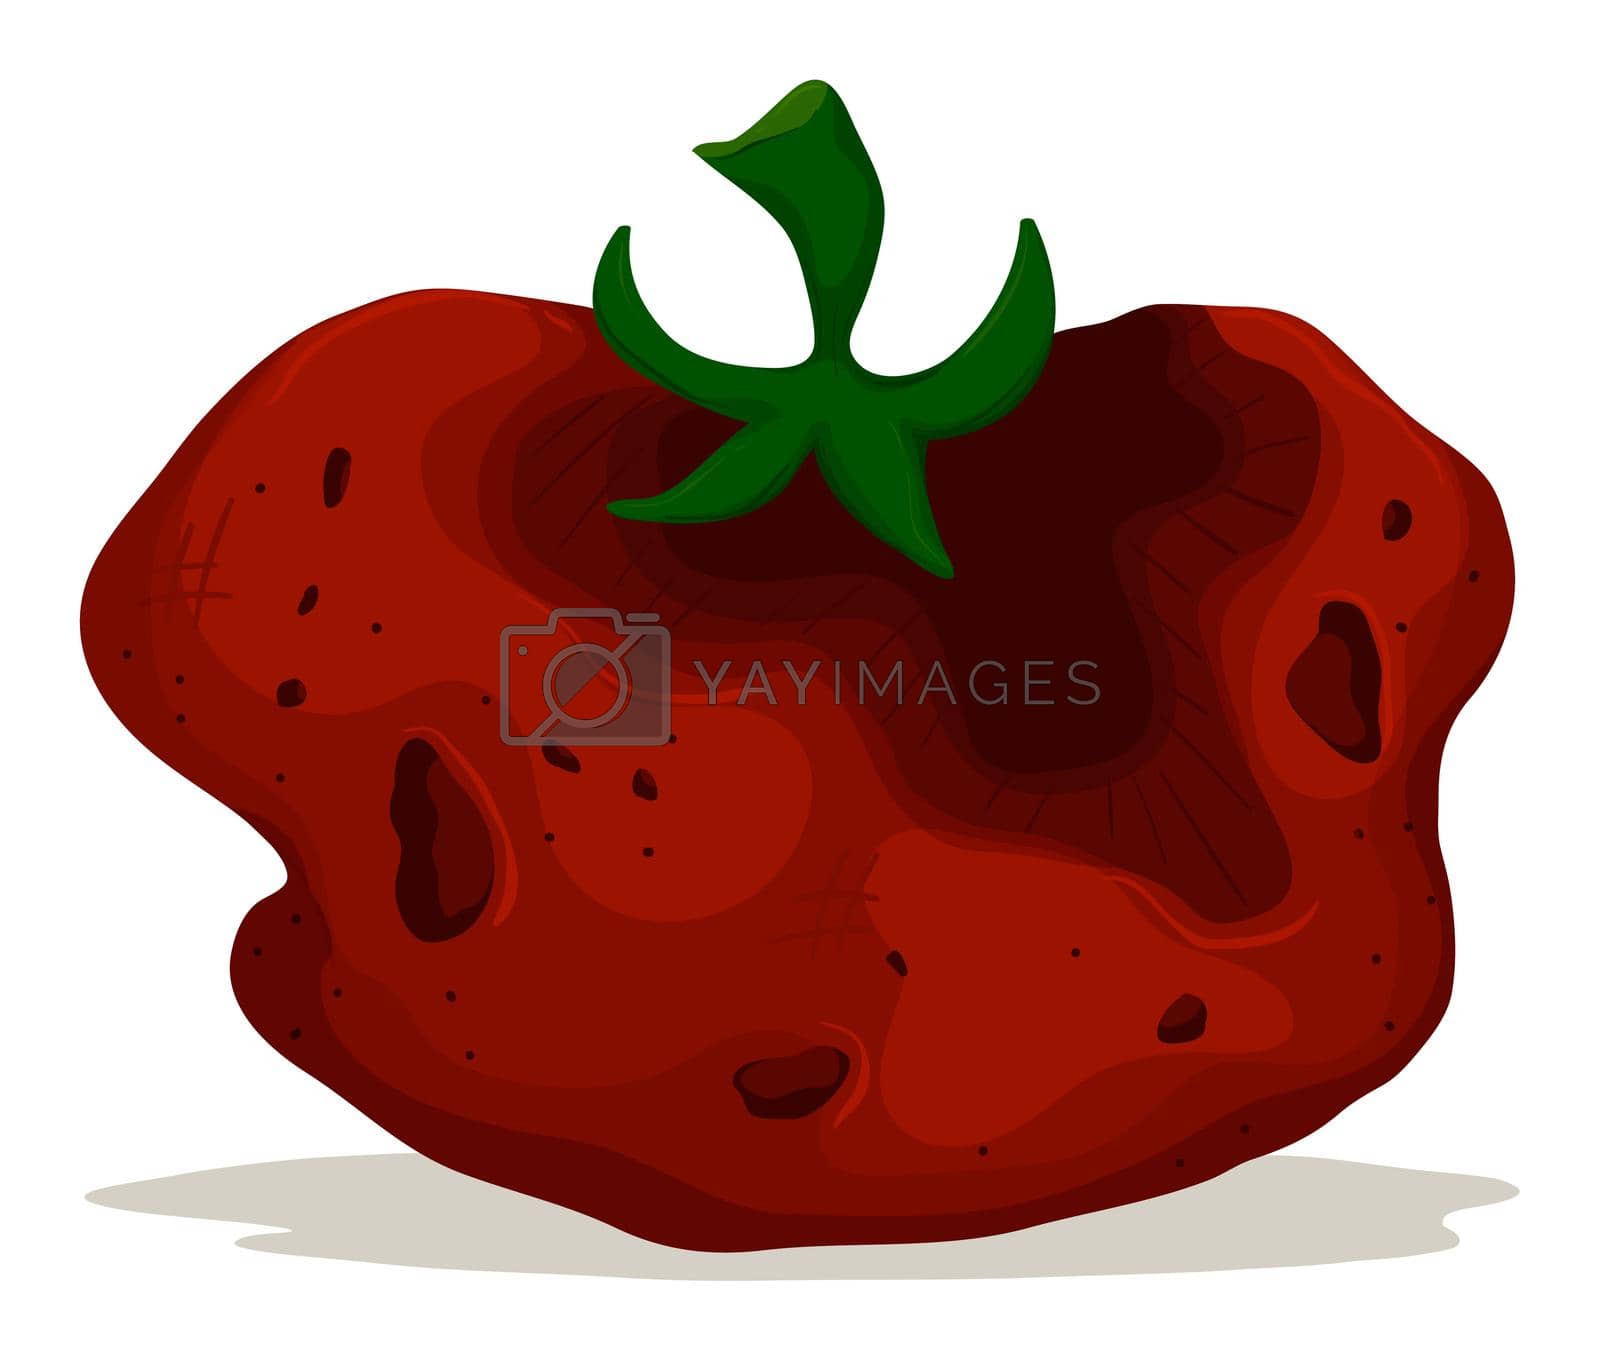 Royalty free image of Rotten tomato on white background by iimages